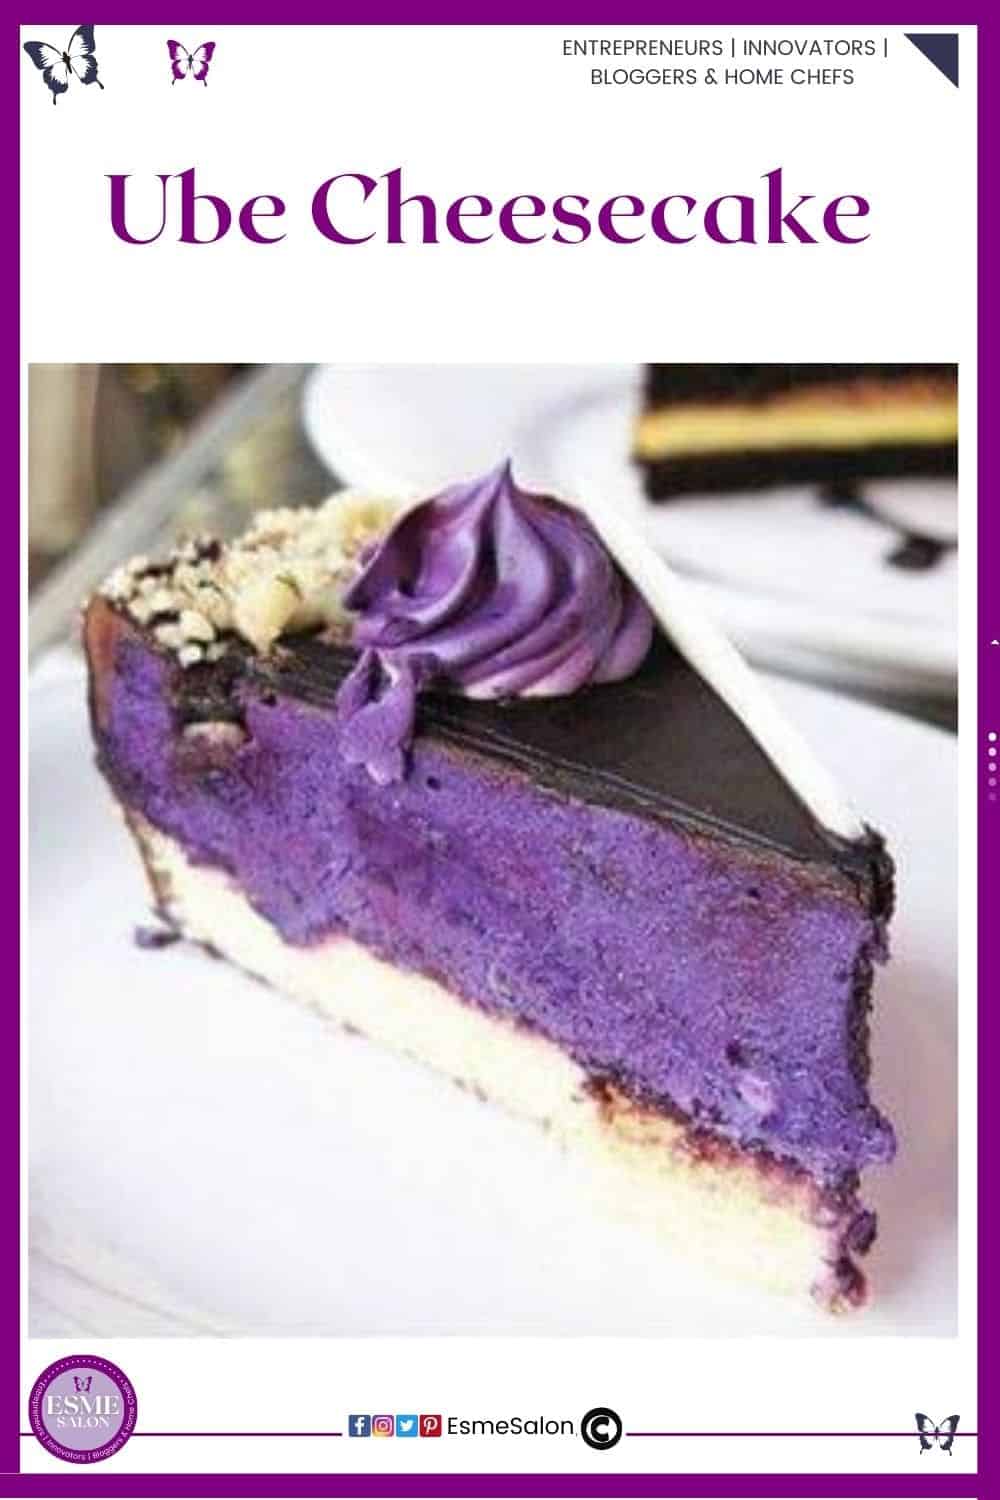 an image of a purple cheesecake made from ube - a purple yam